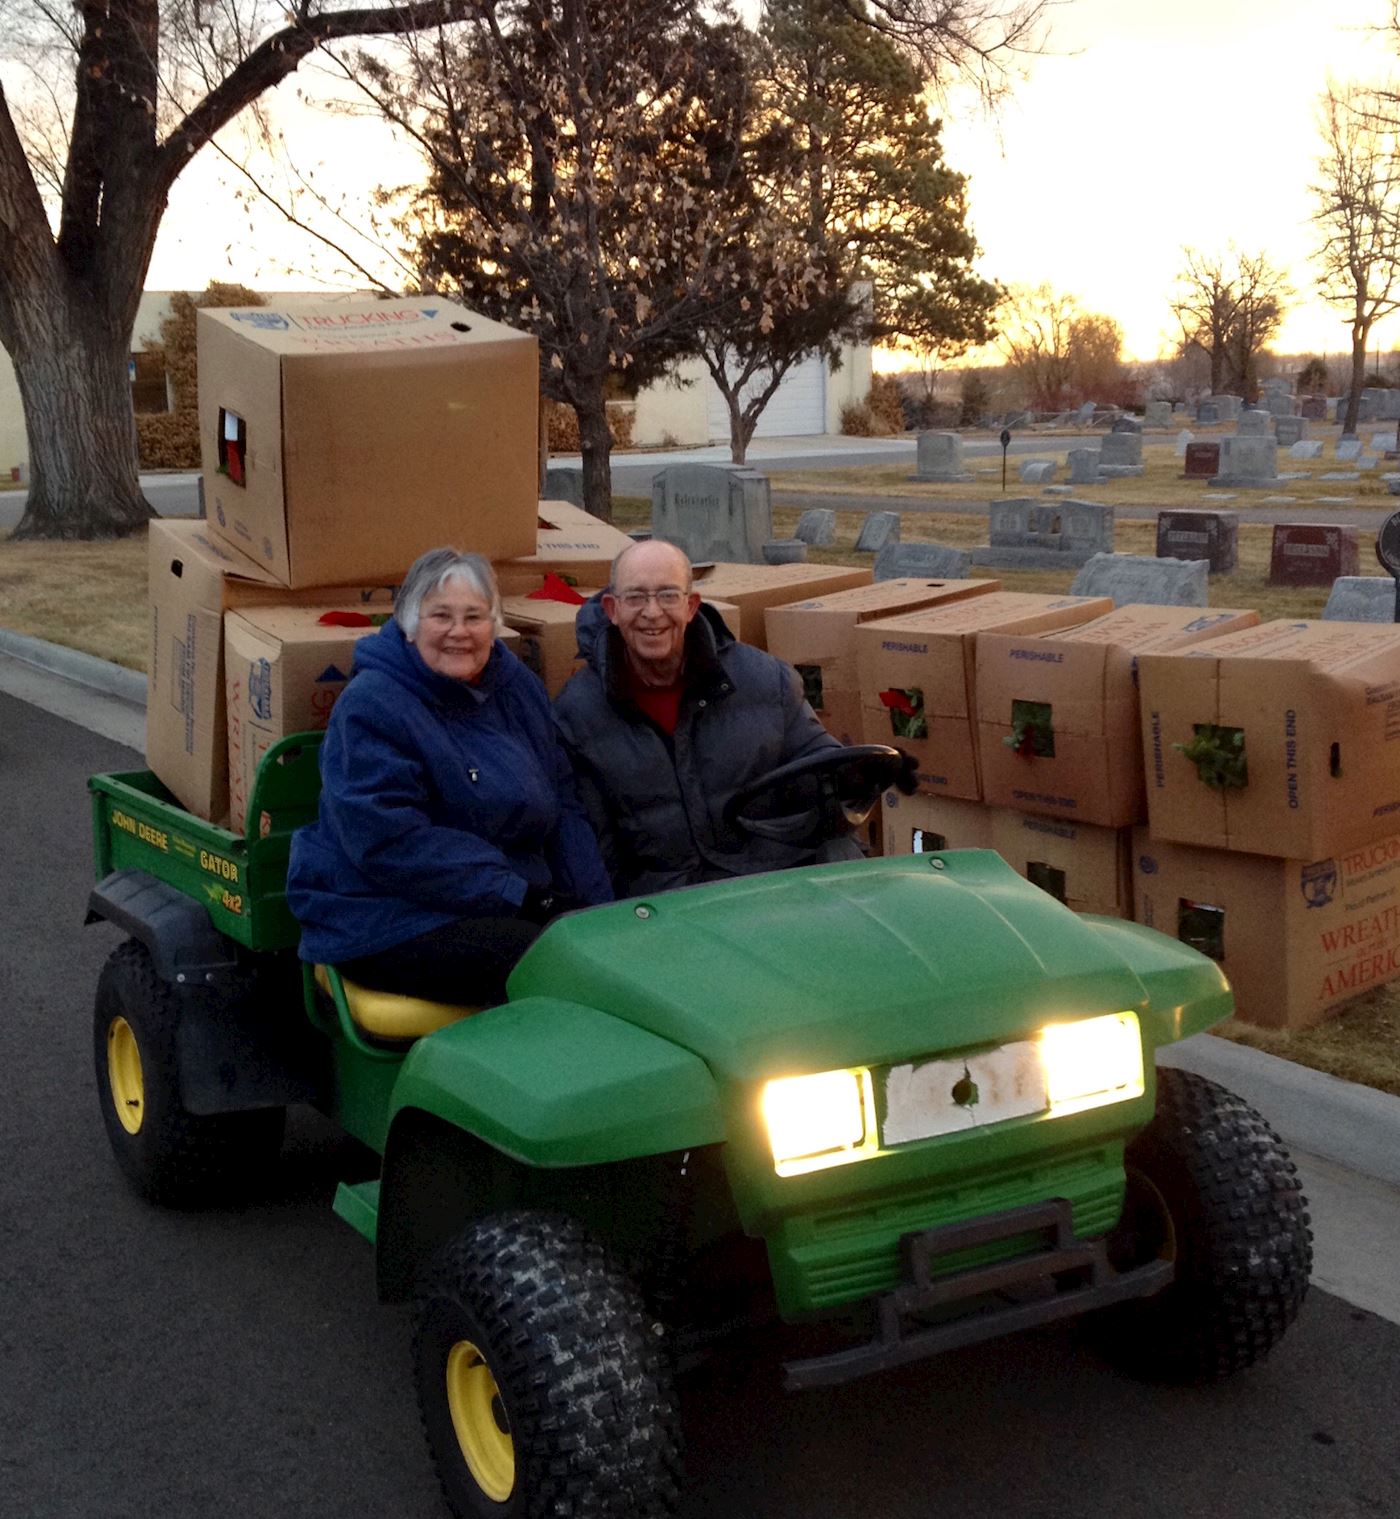 Mike and Linda helping distribute cases of wreaths
